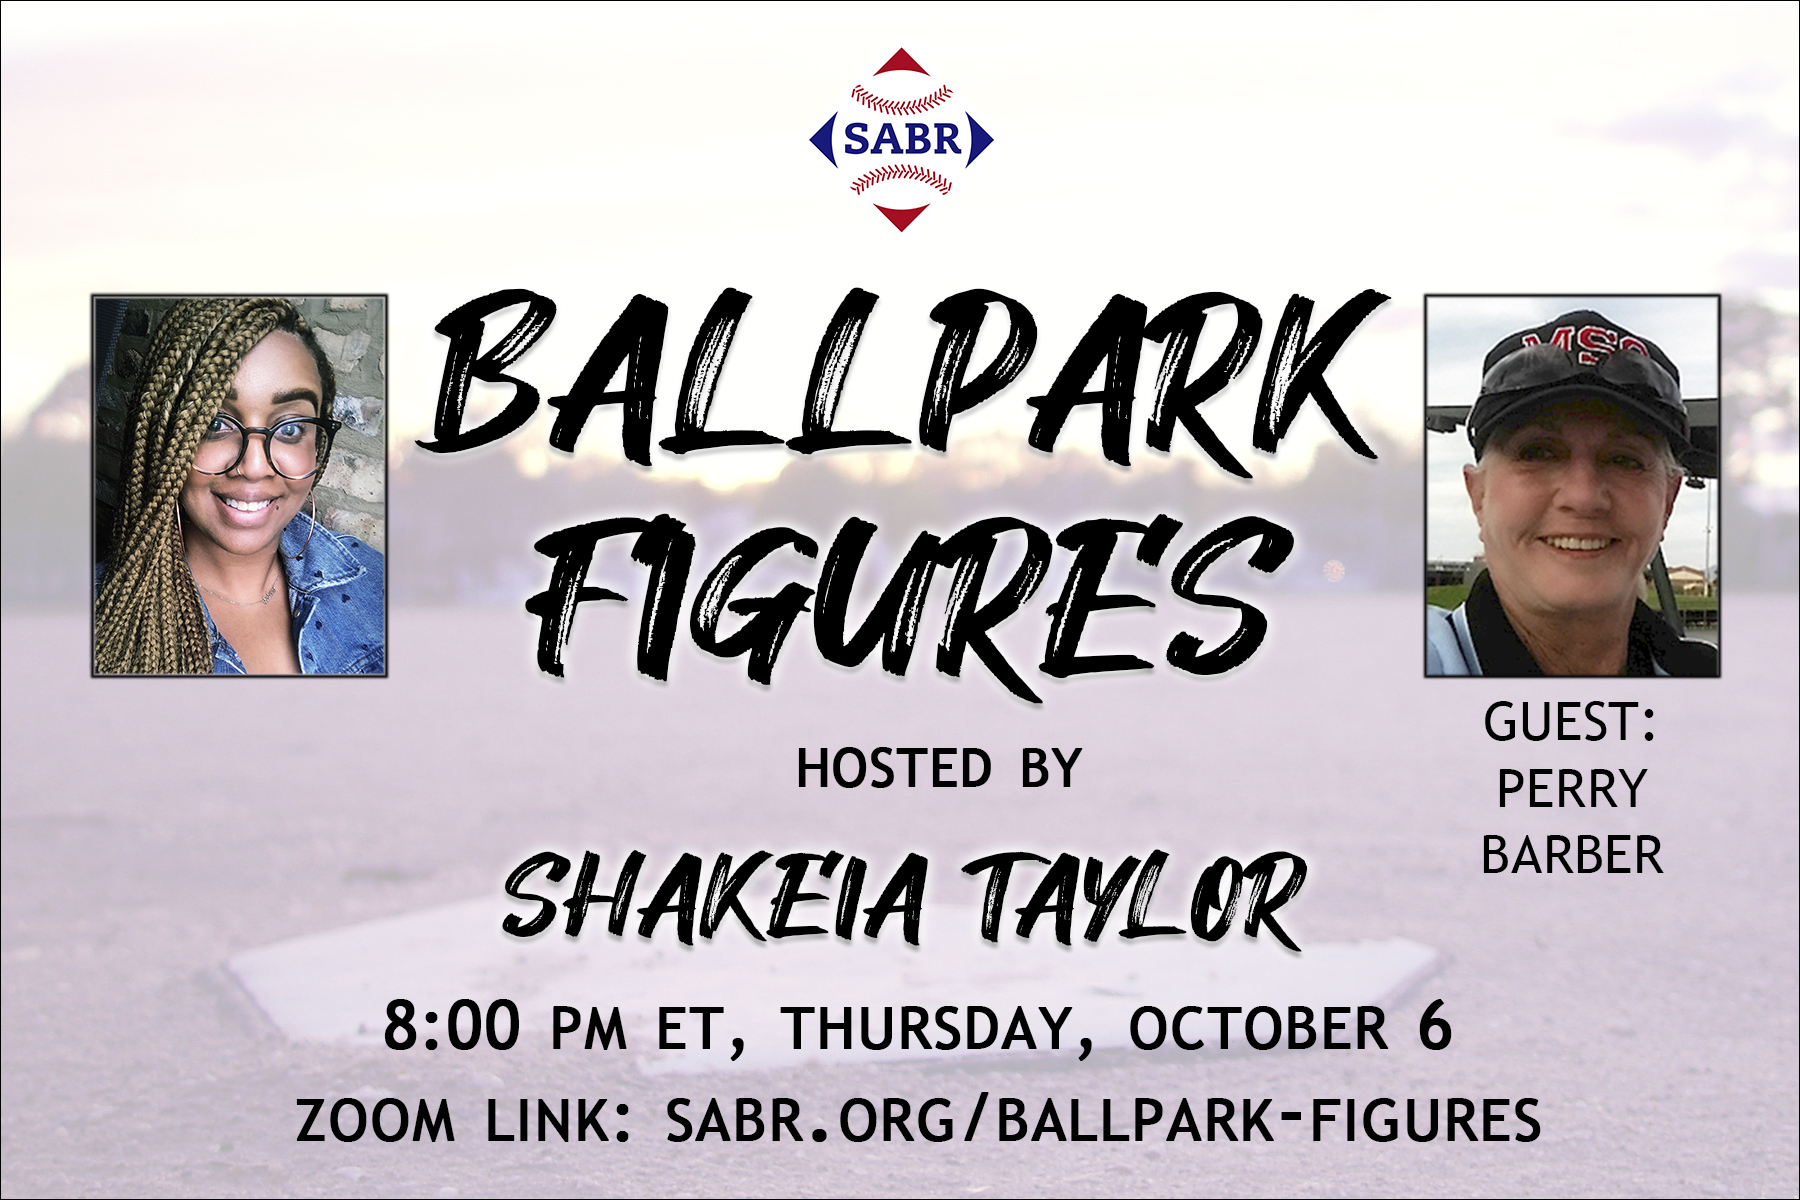 SABR's Ballpark Figures on October 6 with Perry Barber